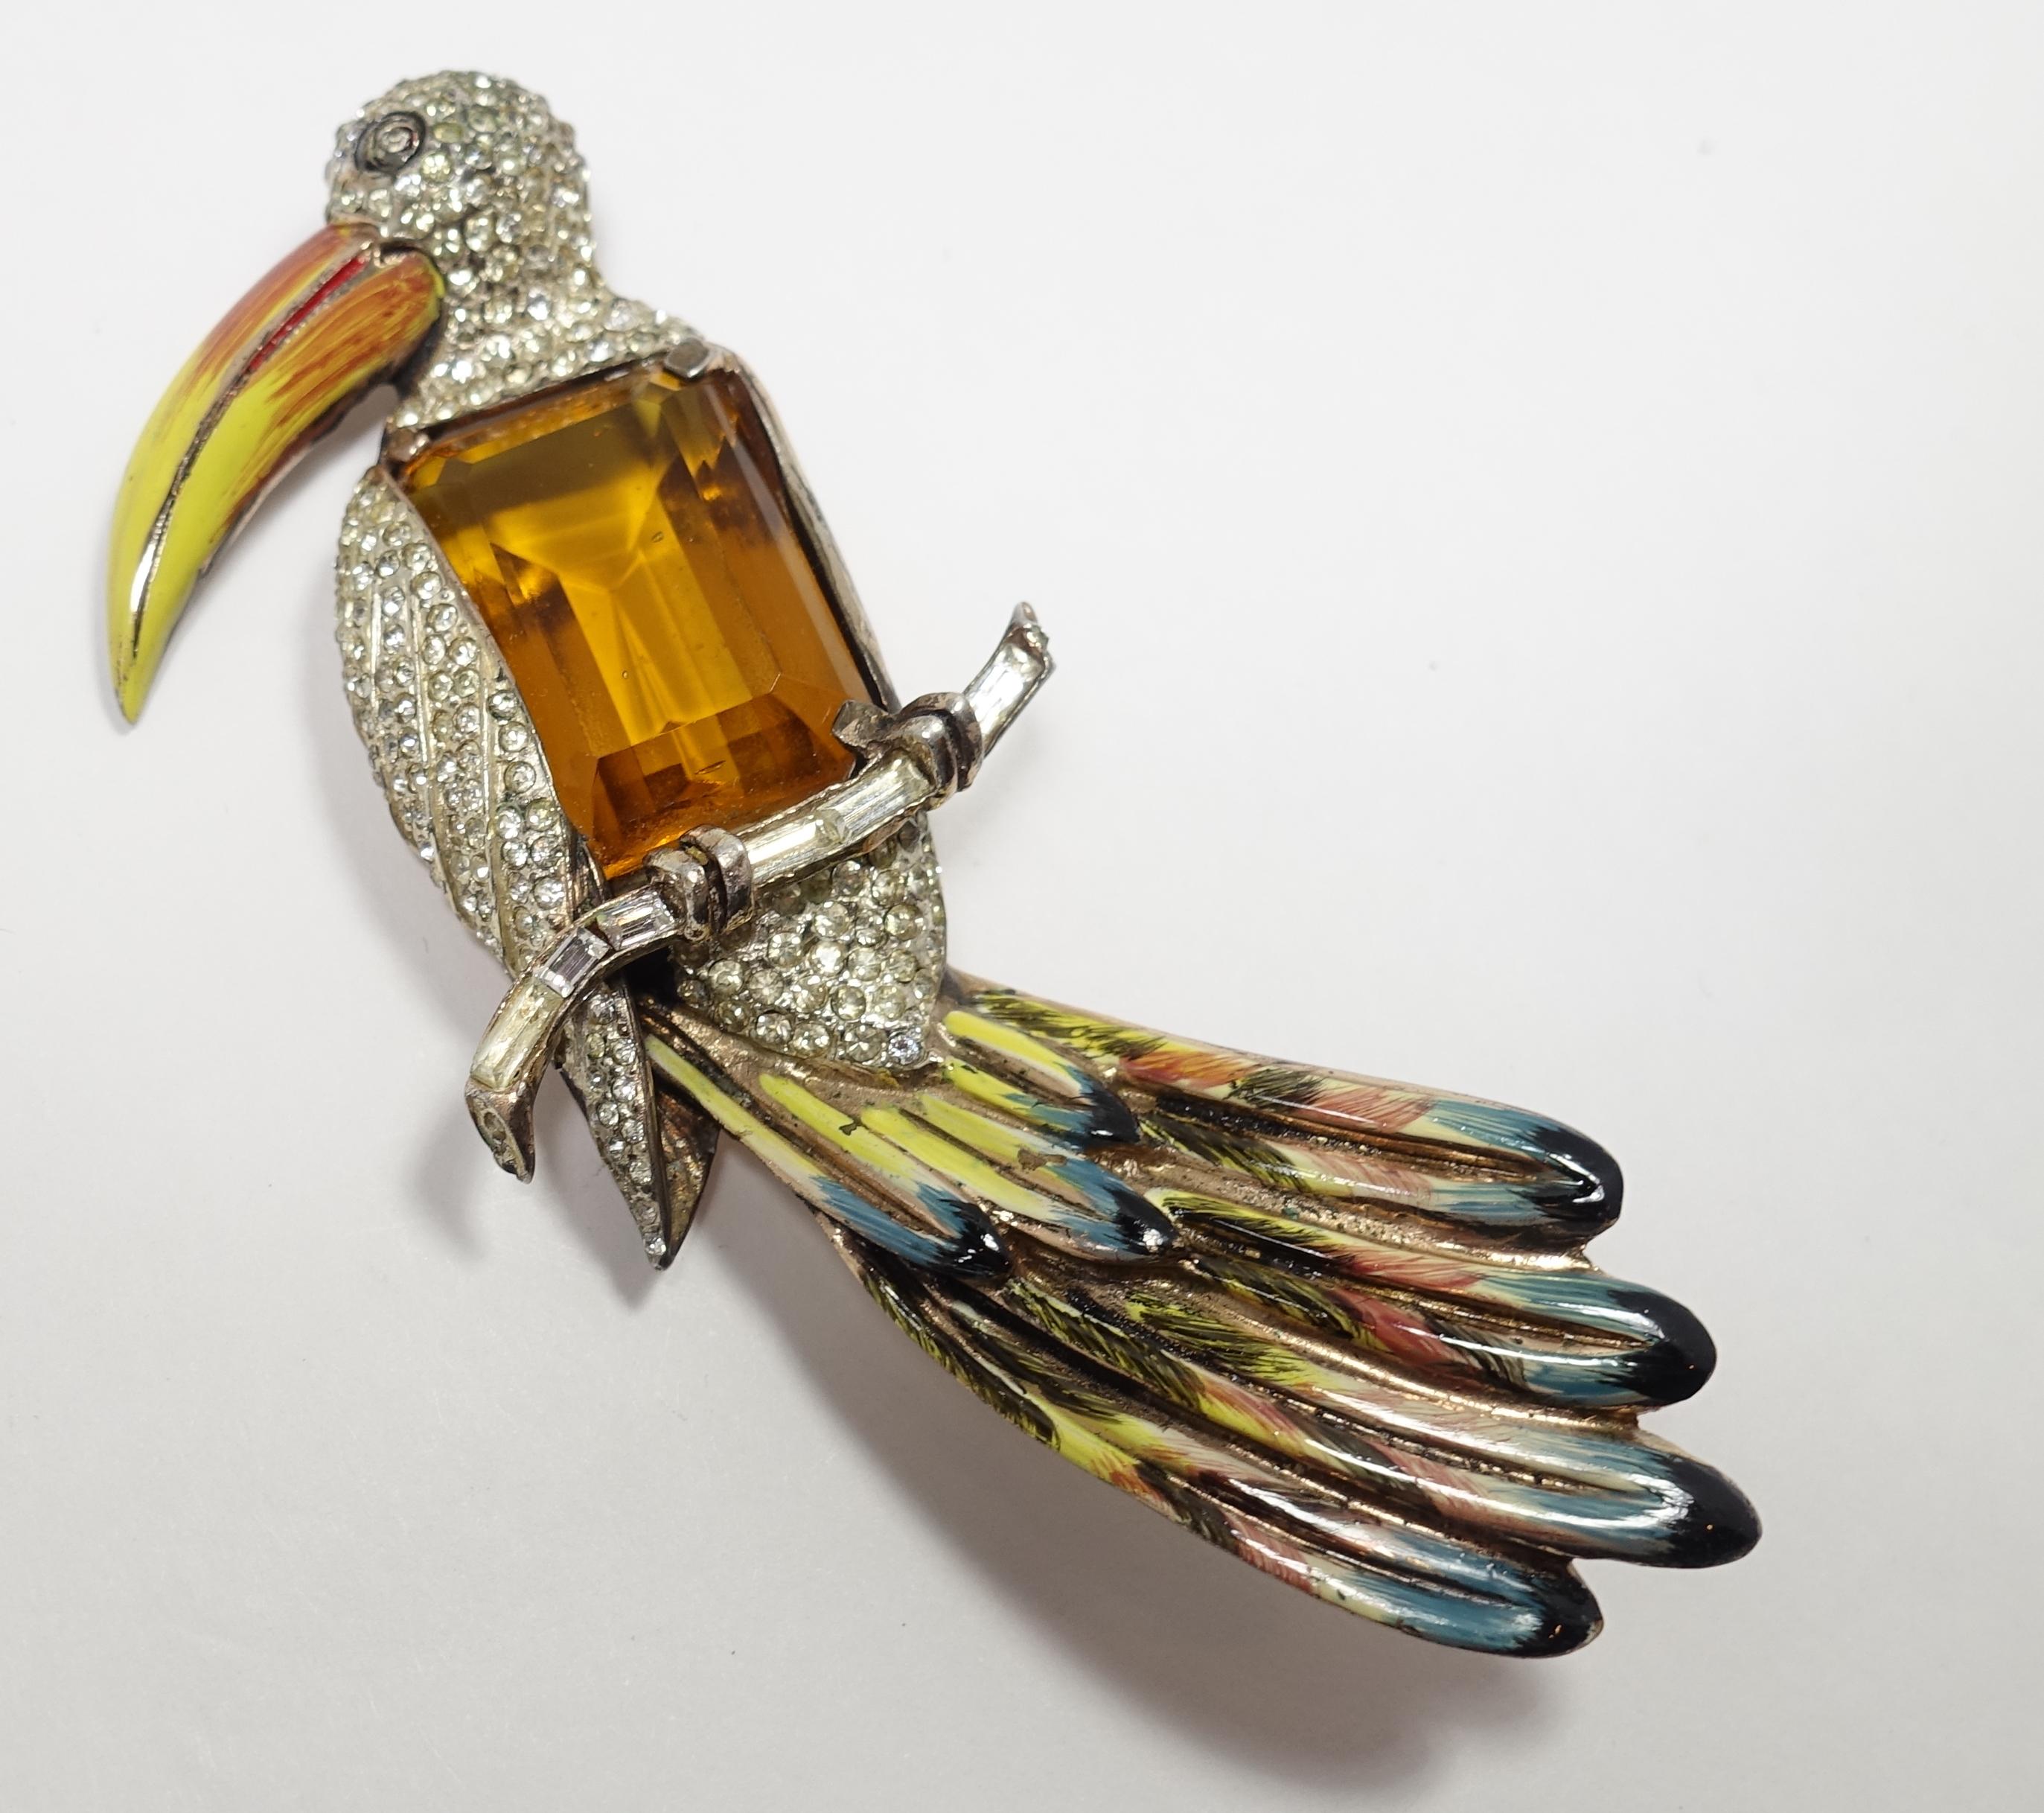 This rare book piece by CoroCraft features a Toucan bird design with a large topaz color center stone, accented by clear rhinestones and multi-colored enameling.  It is sterling silver with gold vermeil. This brooch measures 3-7/8” x 1-1/2” and is